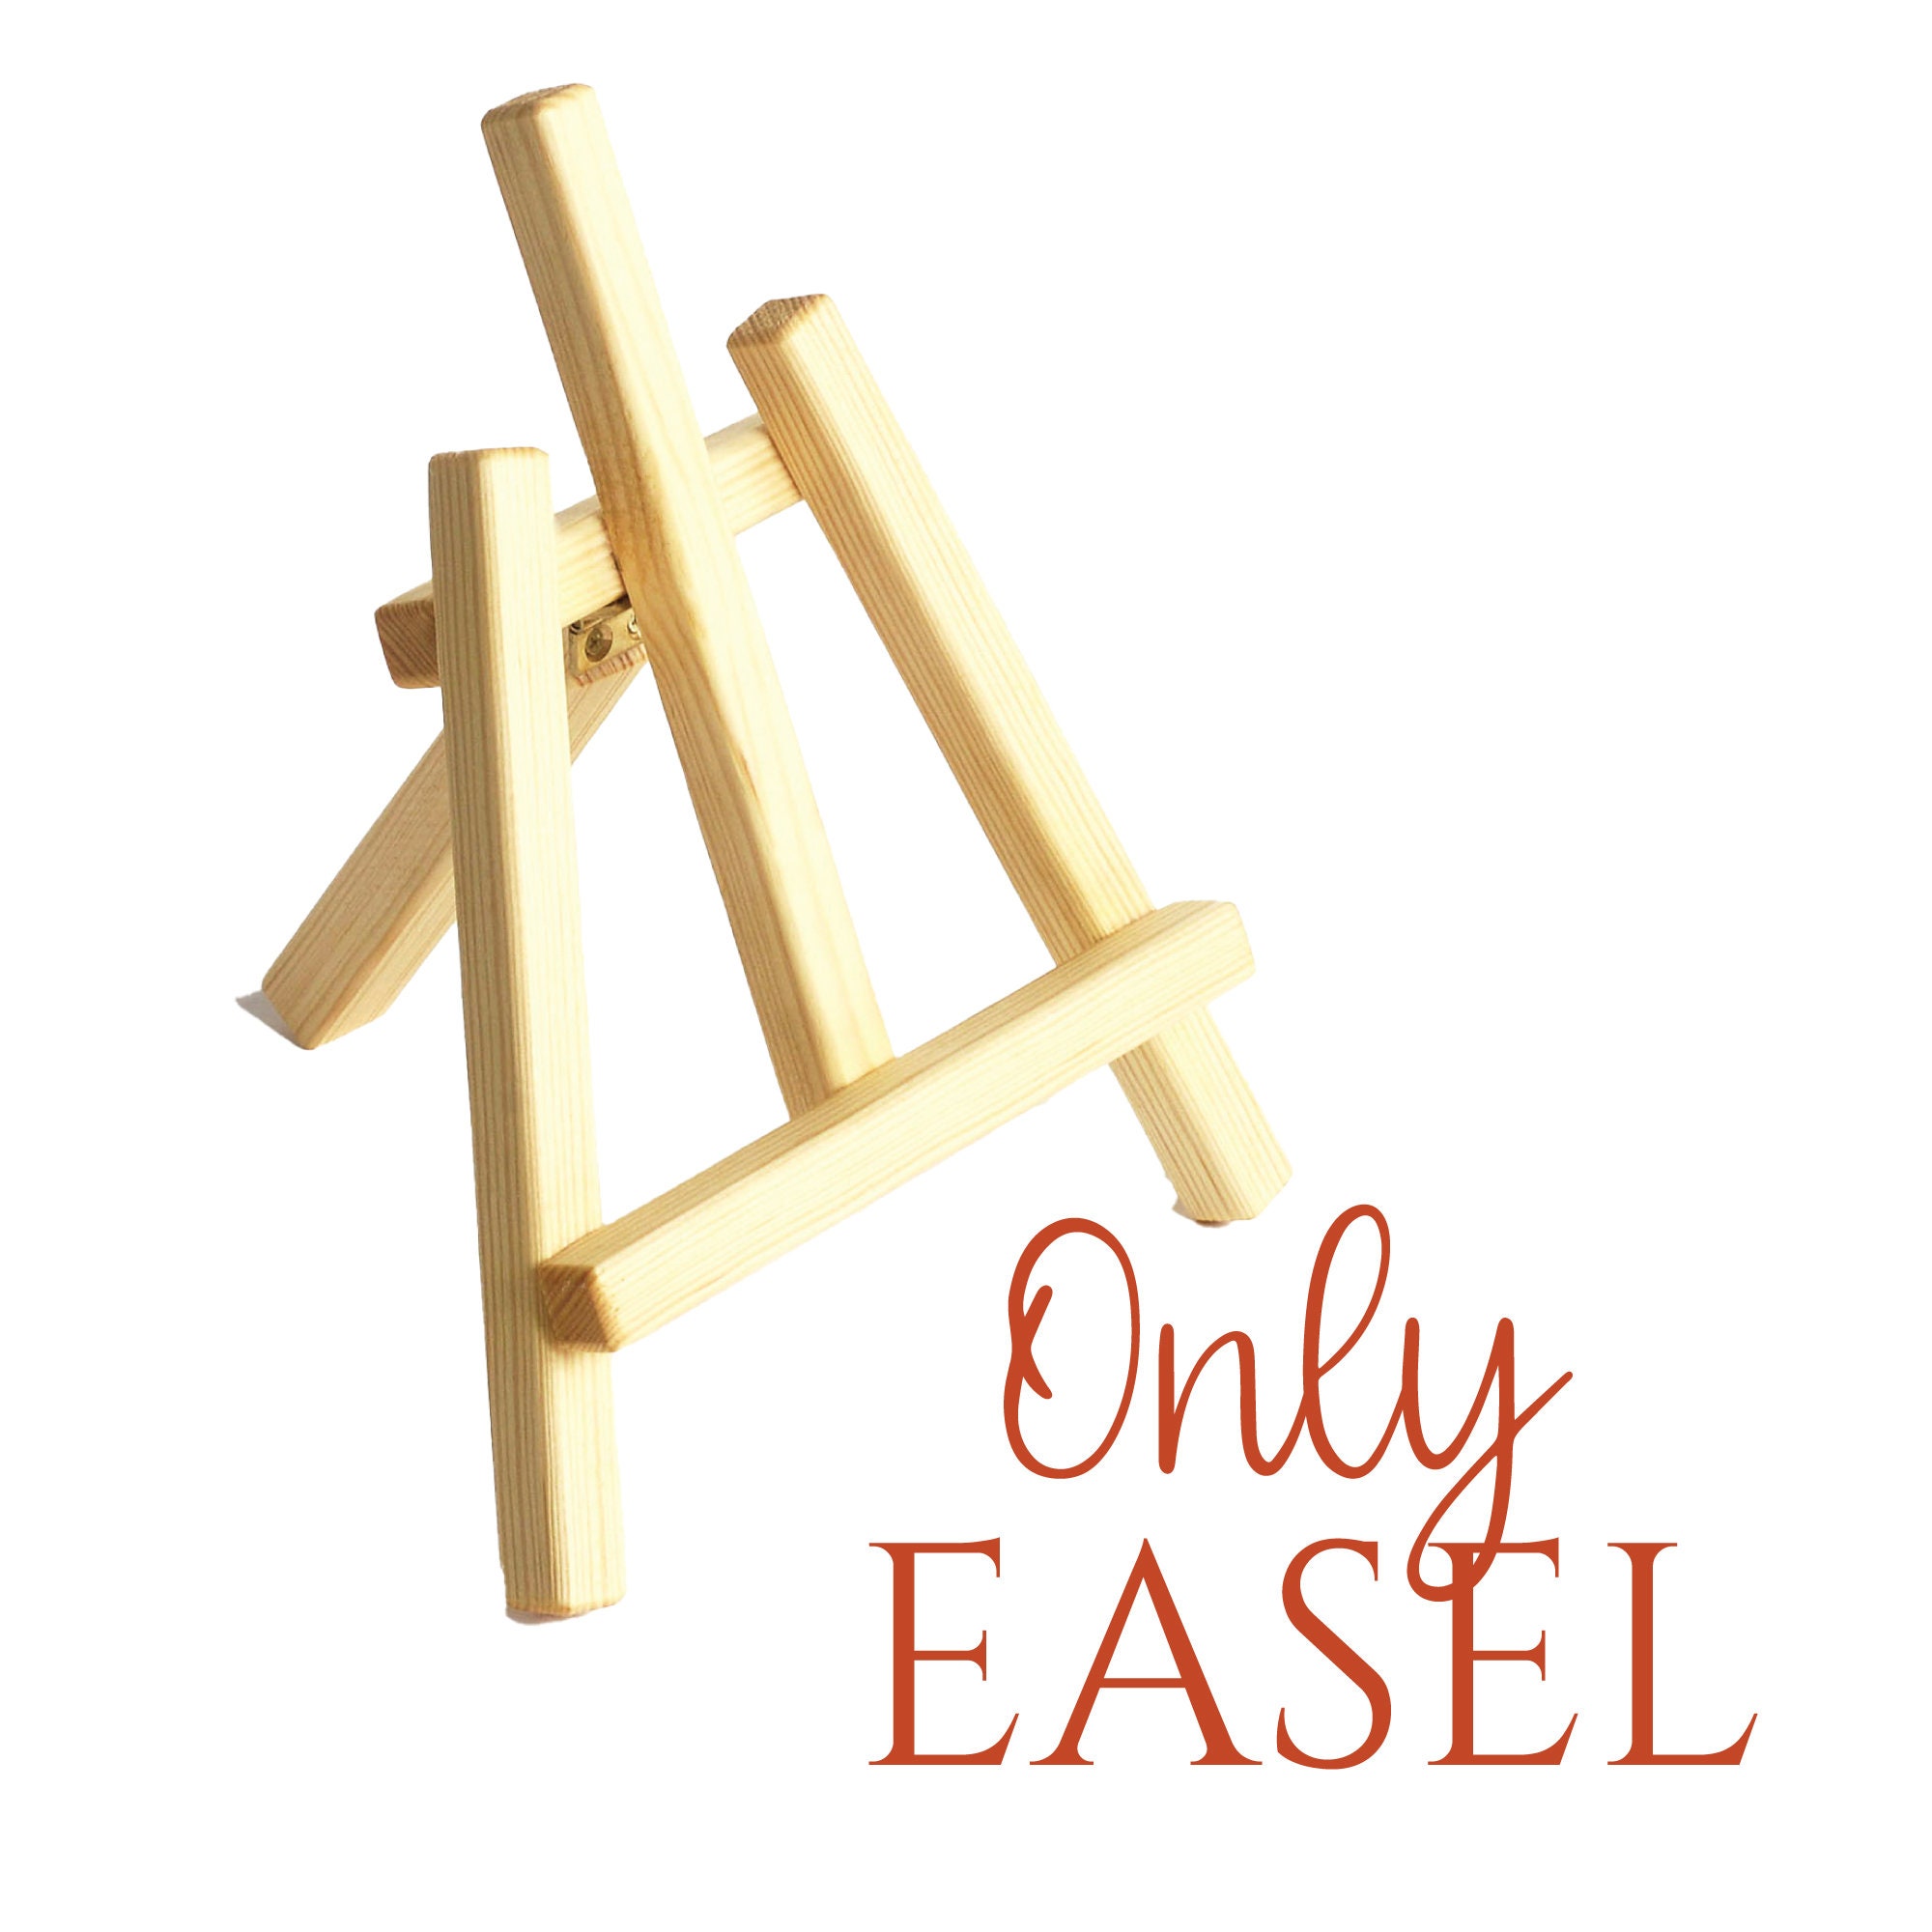 Only Hangers Clear Mini Acrylic Adjustable Display Easel 2.25 in